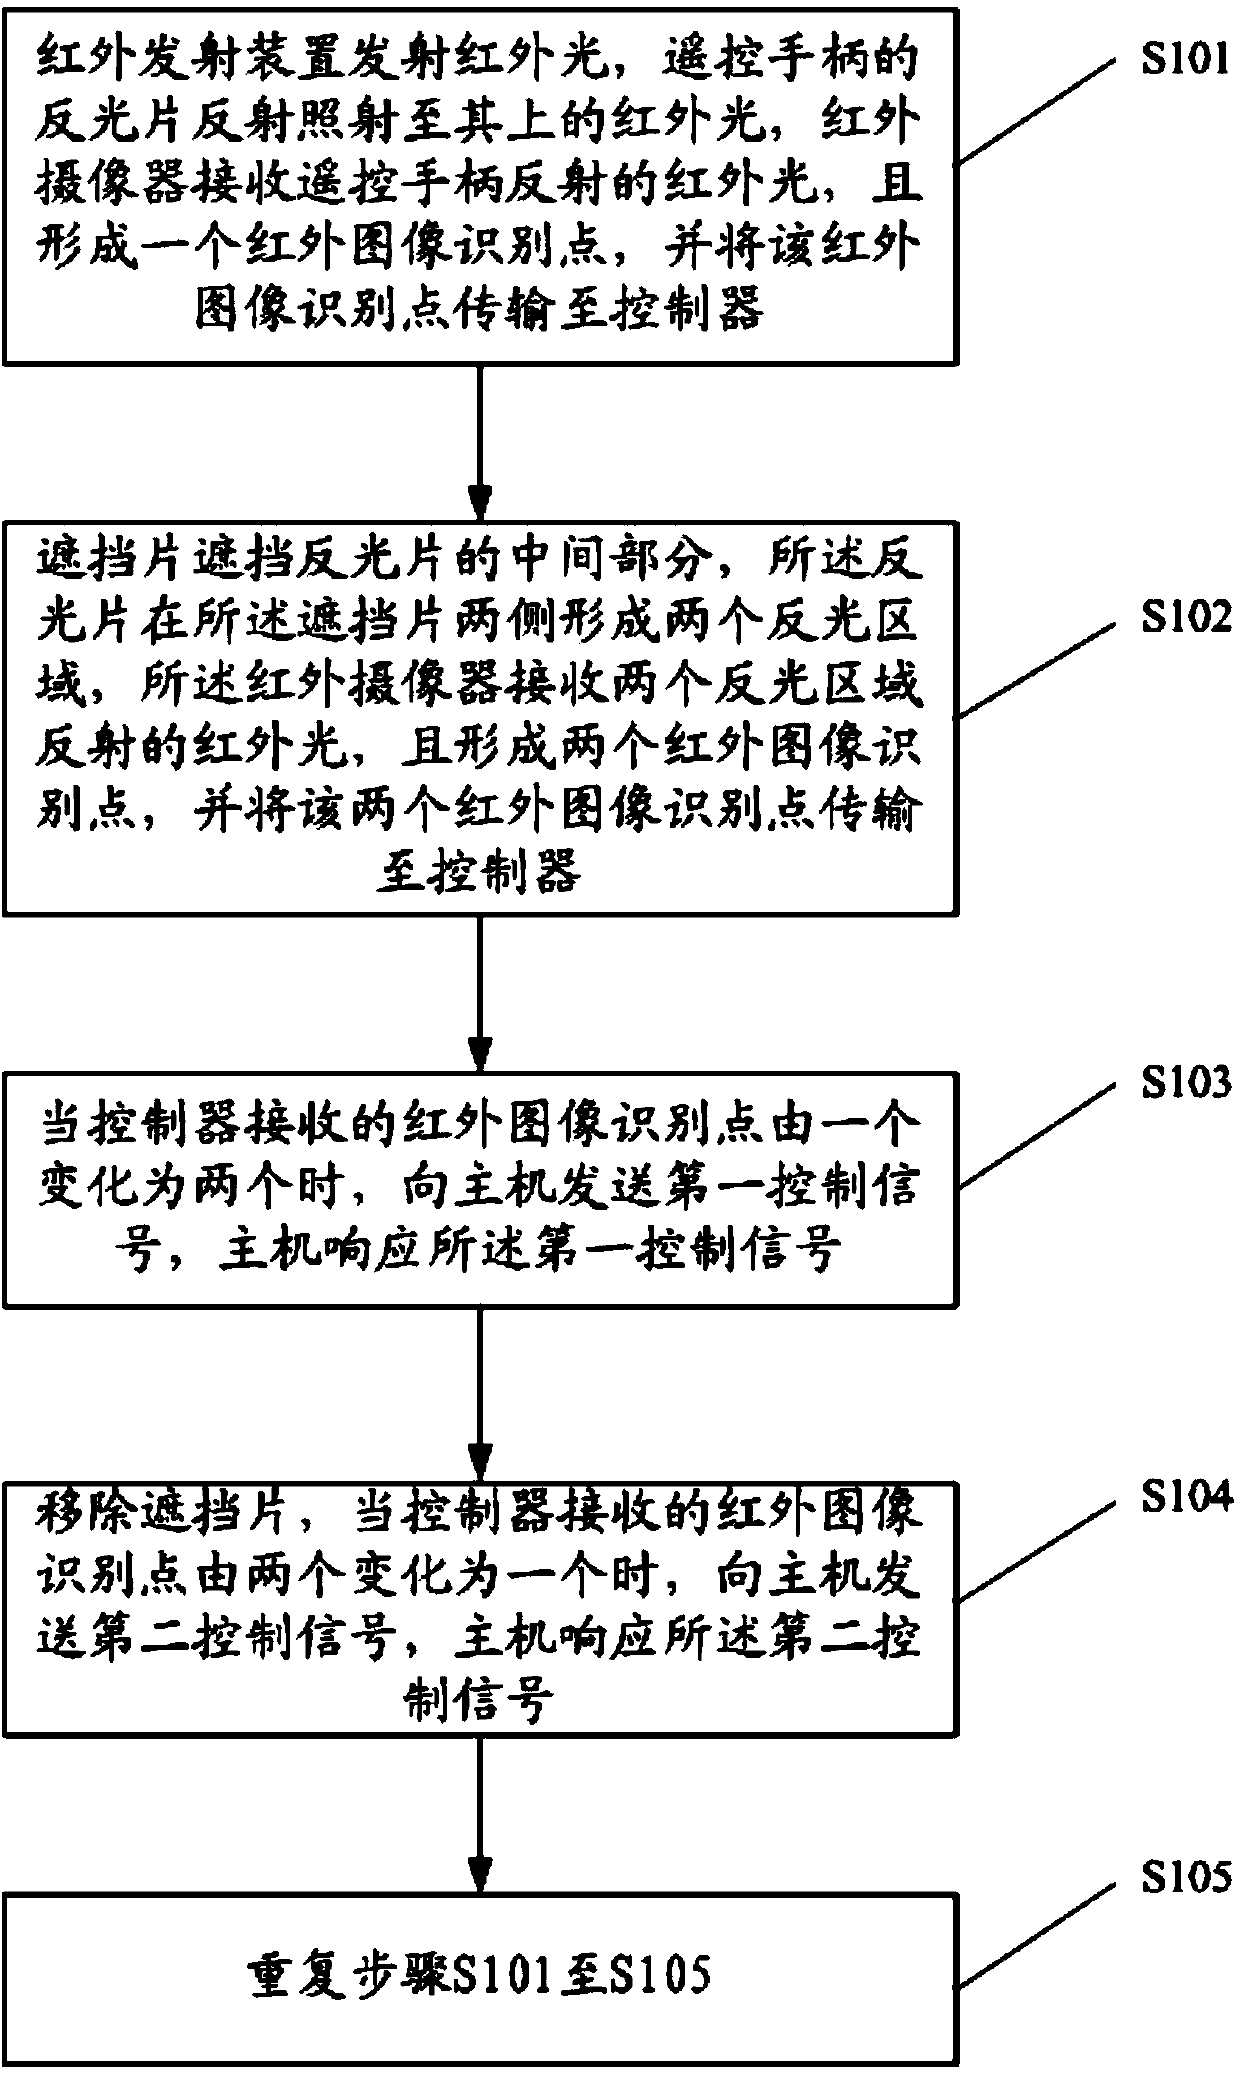 Remote control method for reflecting infrared light through reflection remote control handle